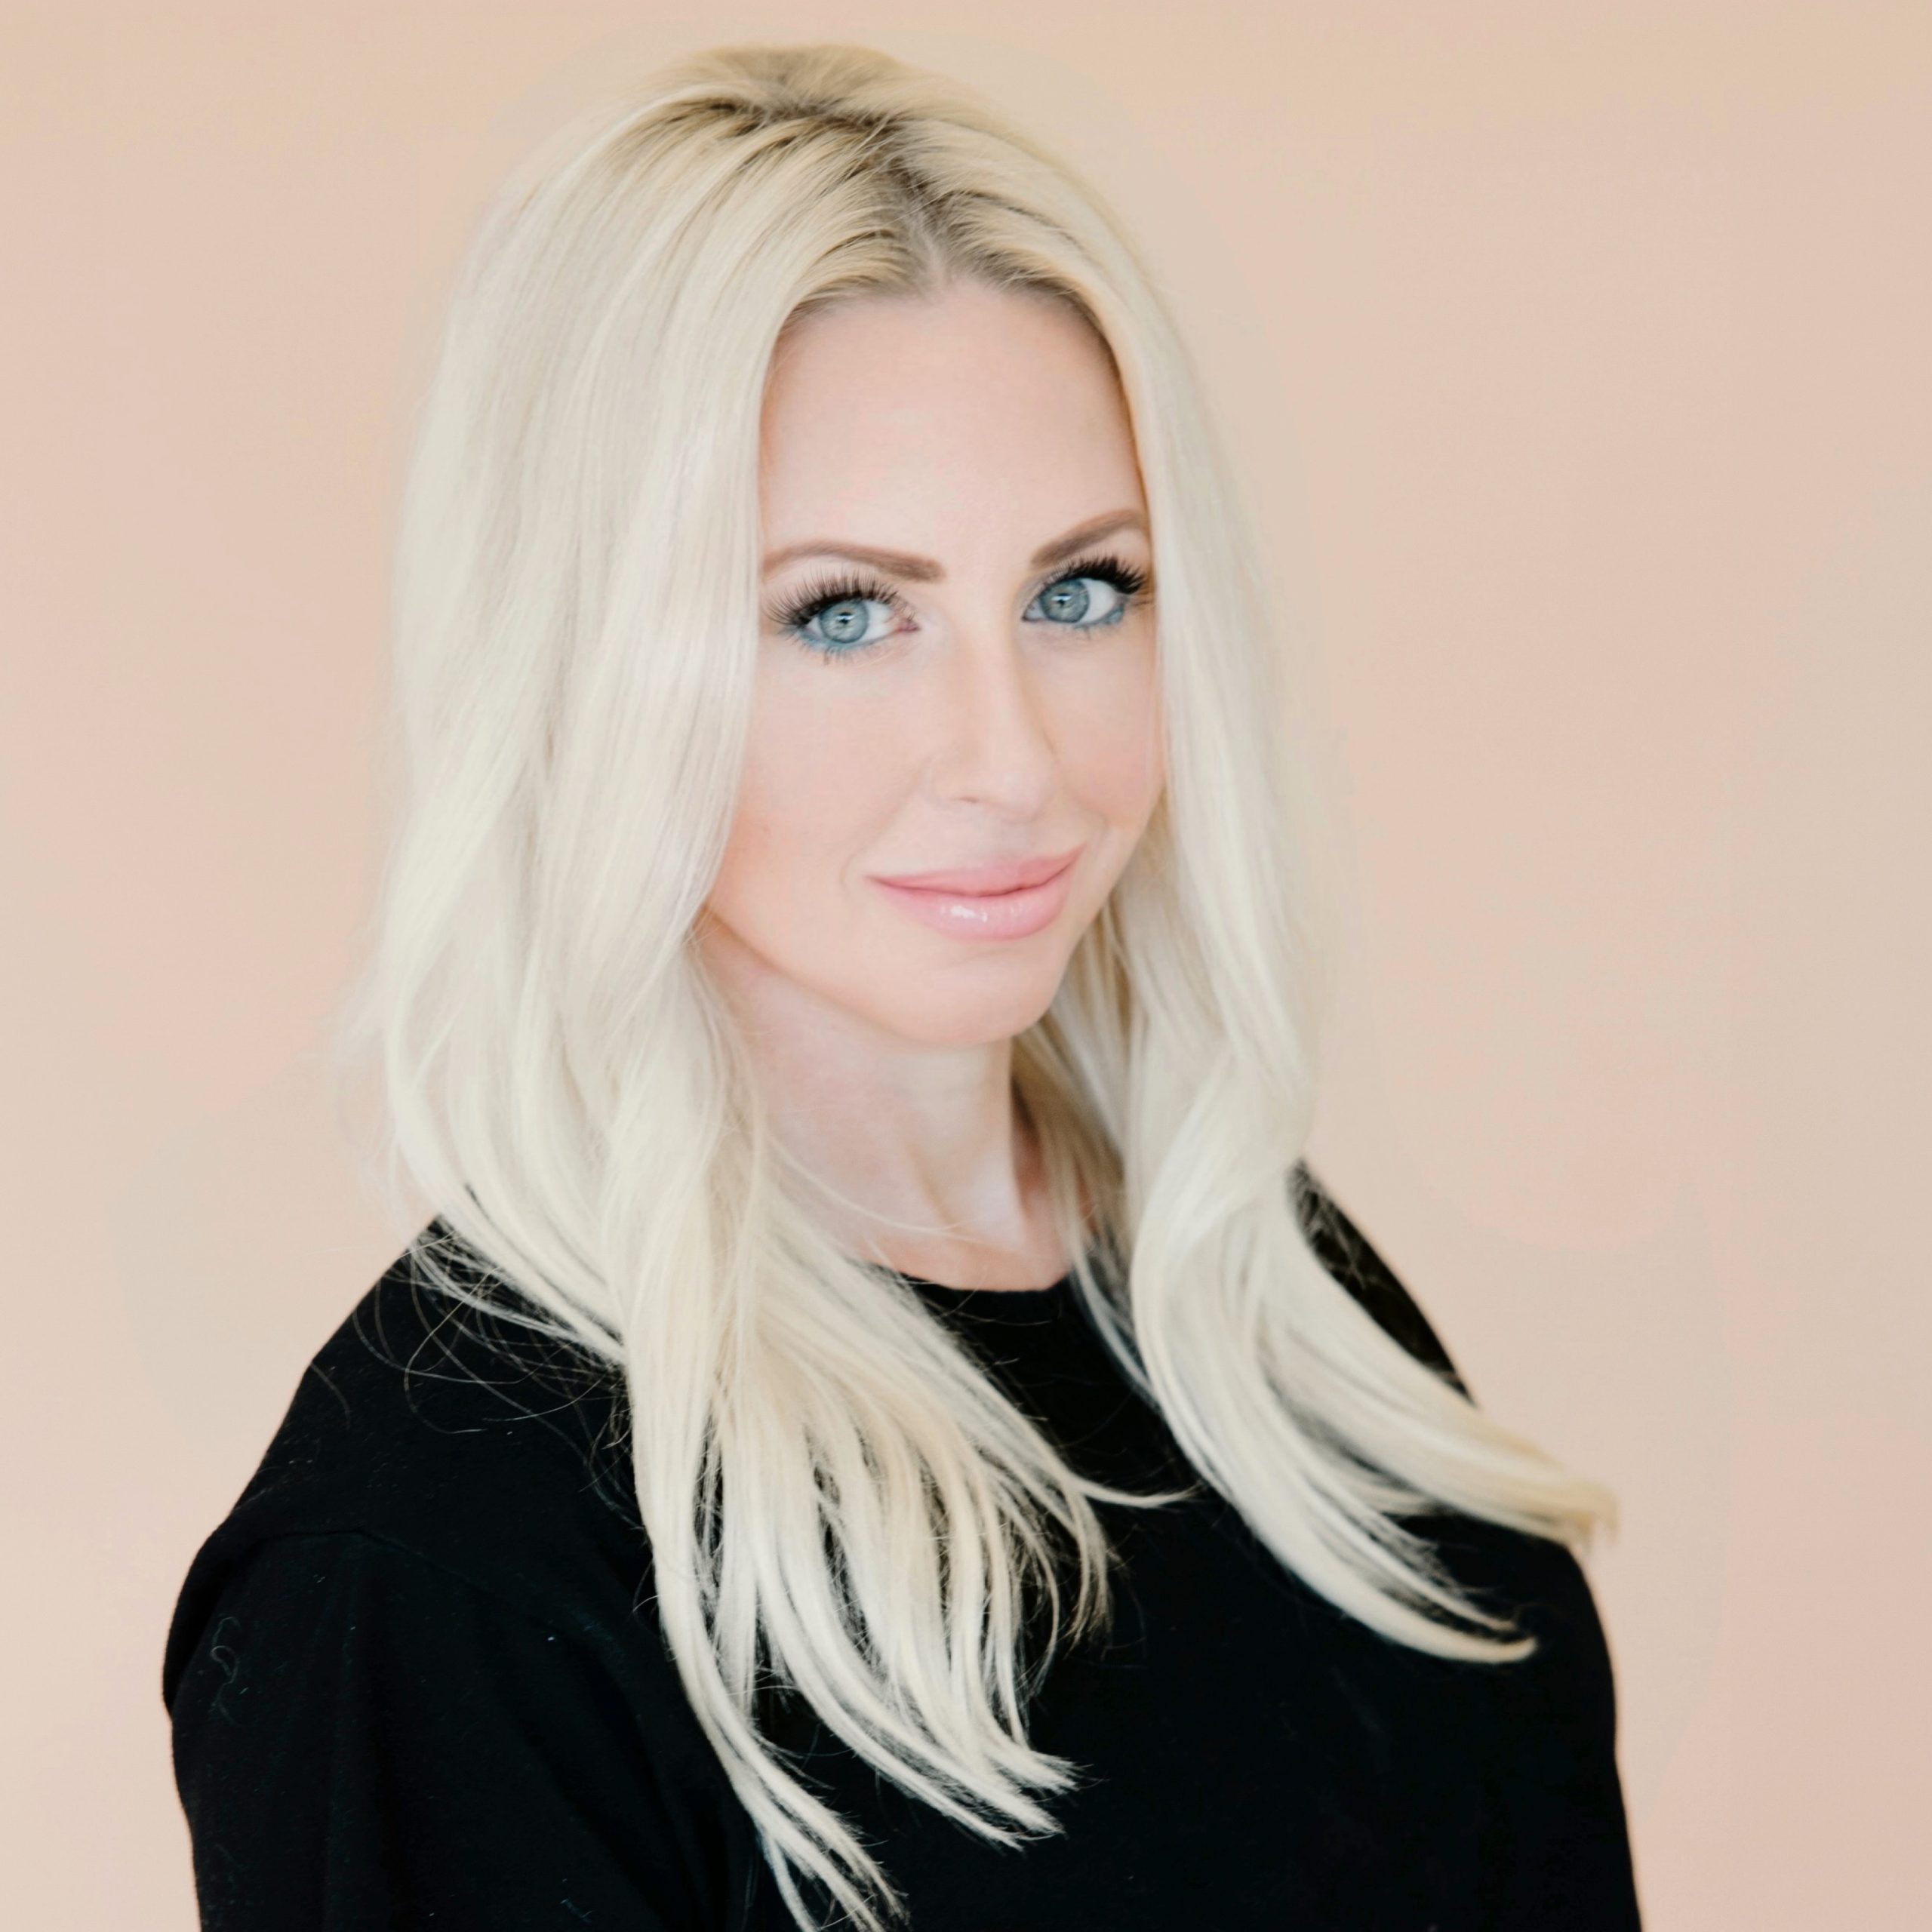 Gemy a blonde hair colorist and salon owner